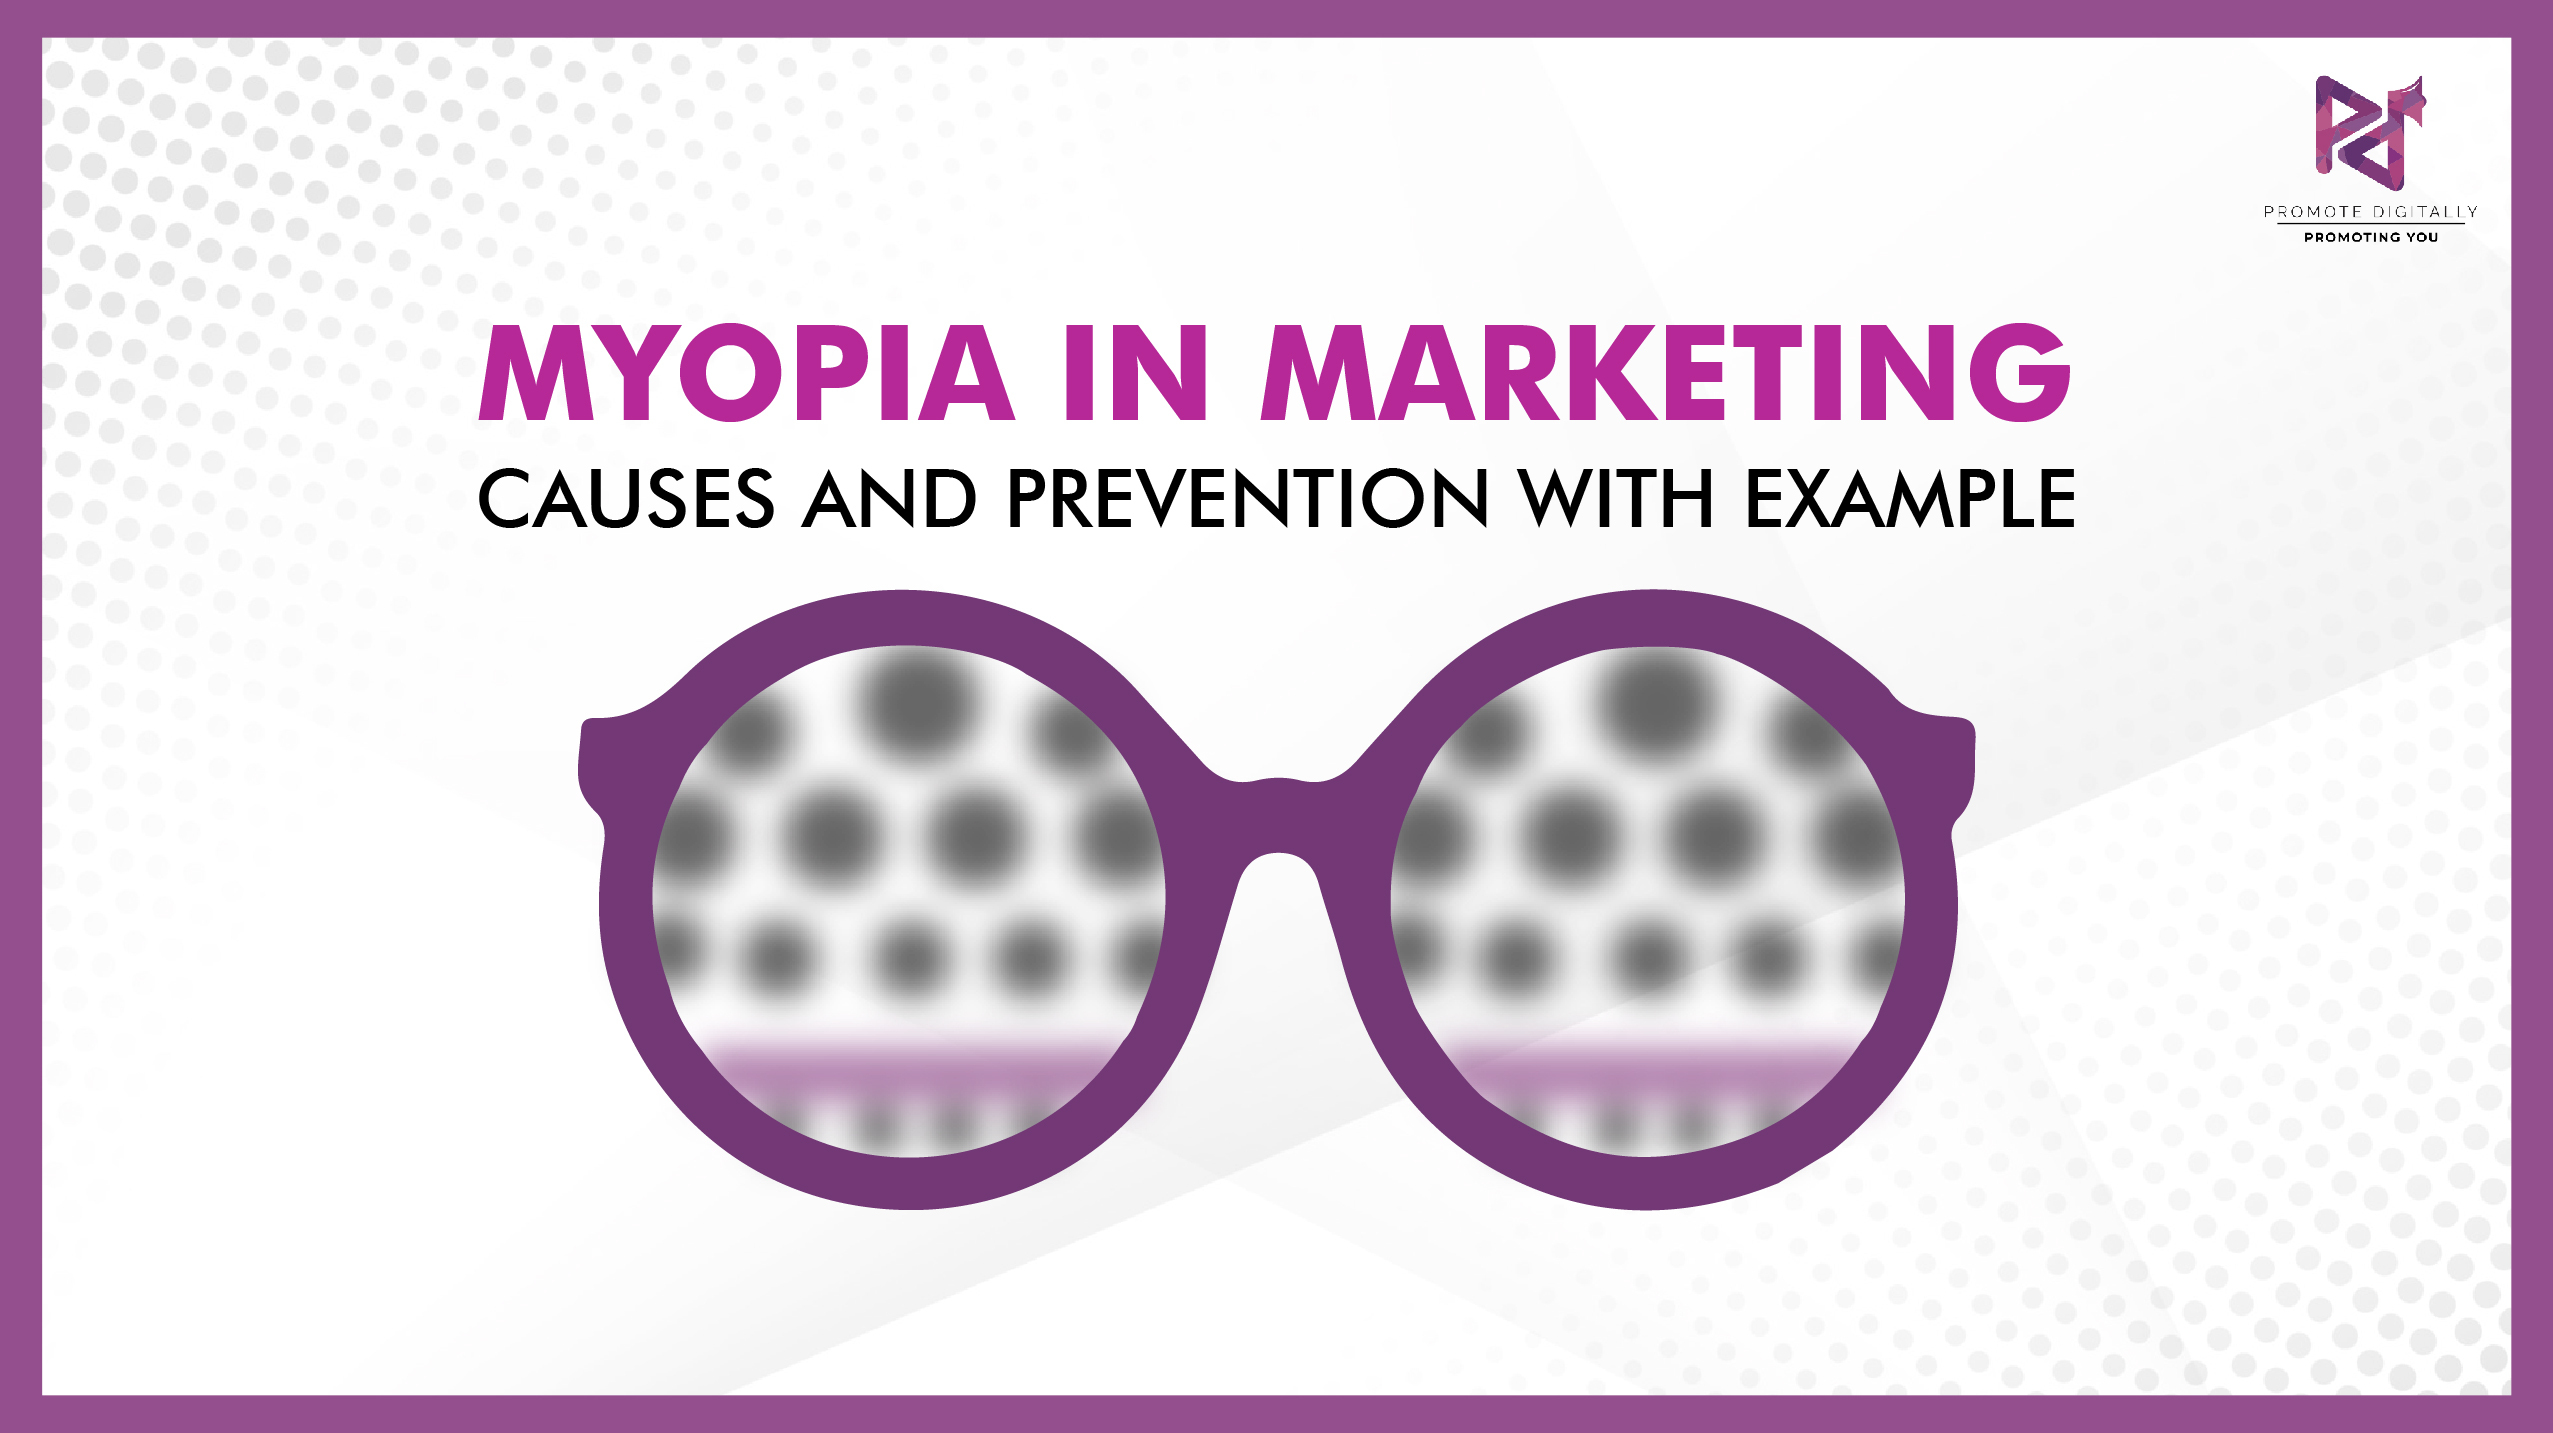 Myopia in marketing: causes and prevention with example